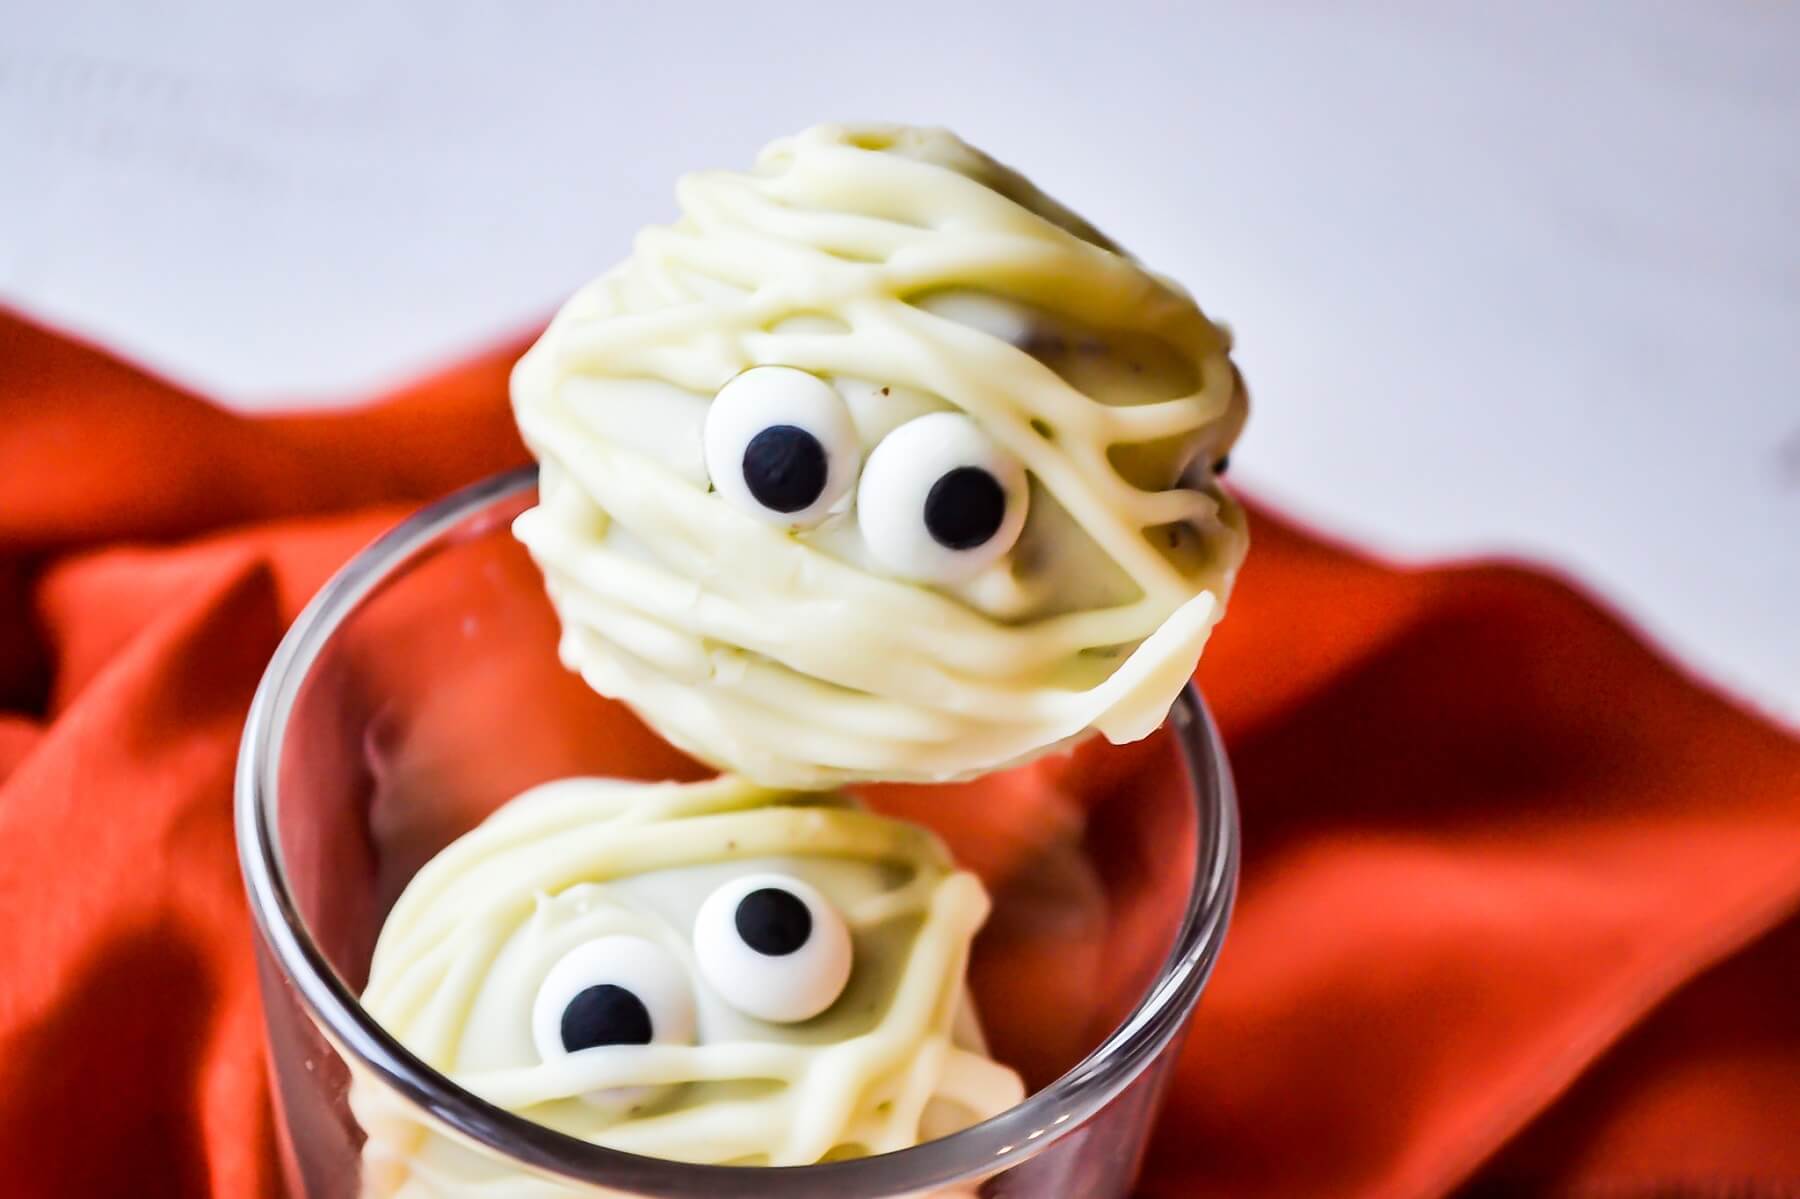 Two white chocolate mummified white chocolate oreo truffles with candy eyes sit in a glass.